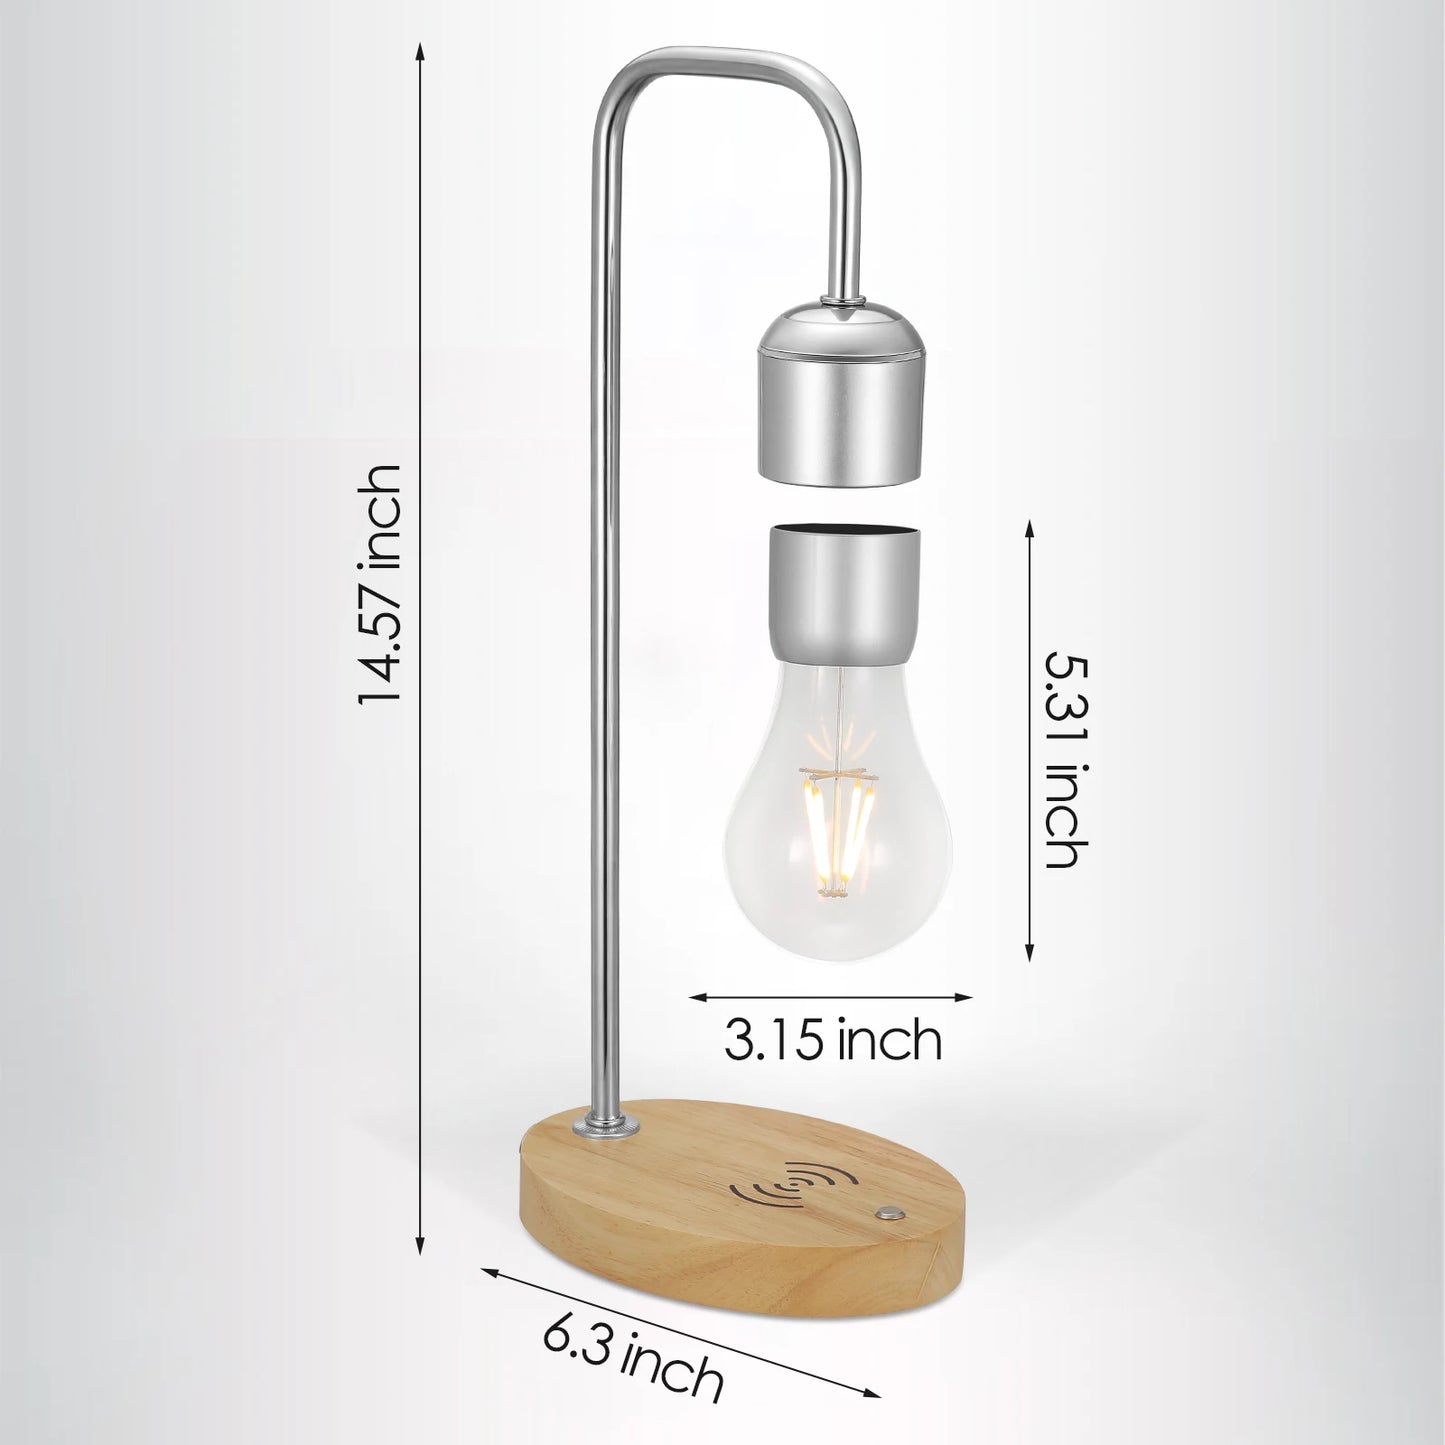 Levitating Lamp Floating fluorescent light bulbs Wireless Charger